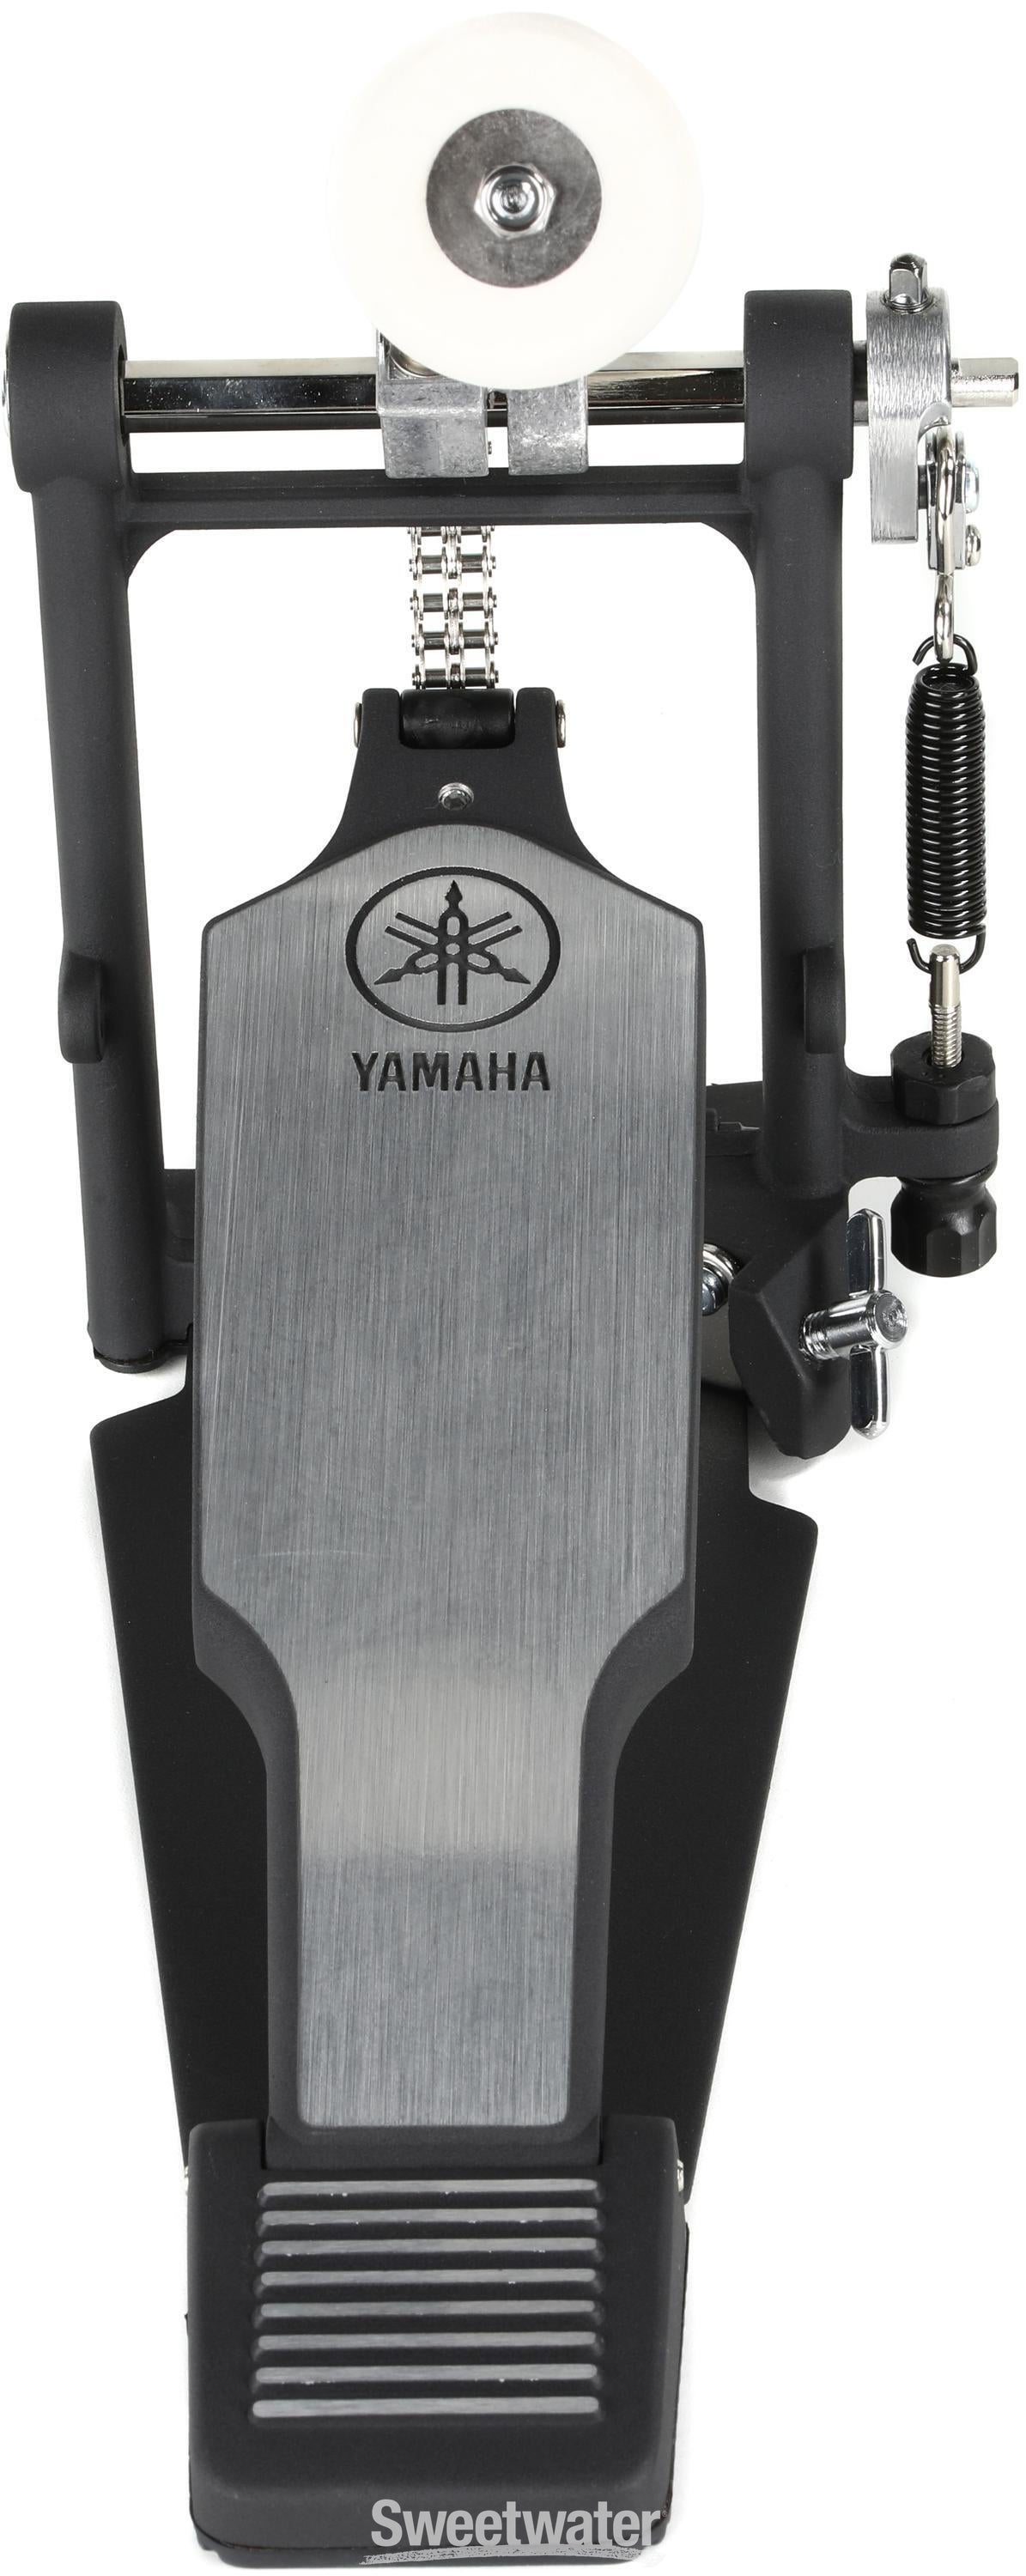 Yamaha FP-8500C Double Chain Drive Single Bass Drum Pedal with Extended  Footboard